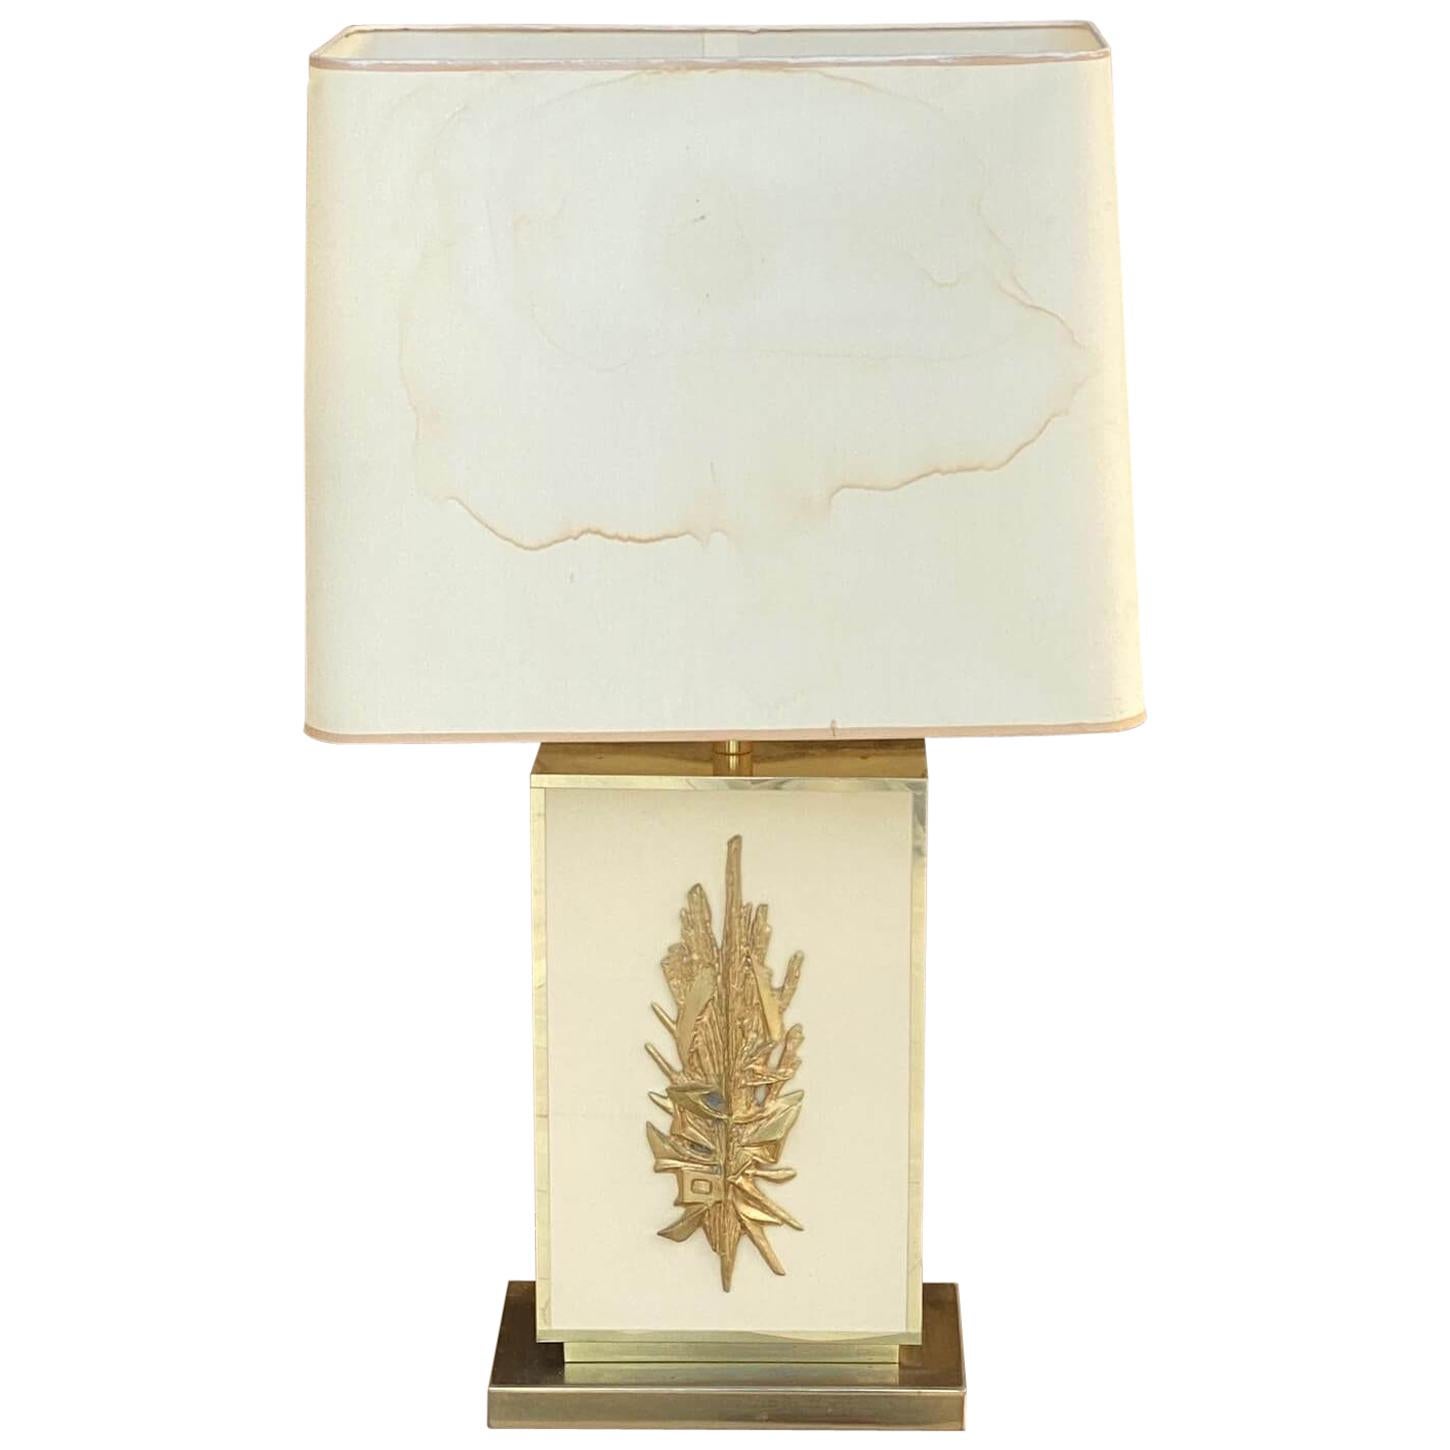 Table Lamp by Philippe Cheverny, Large Model, Brass, Resin, Plastic, France 1970